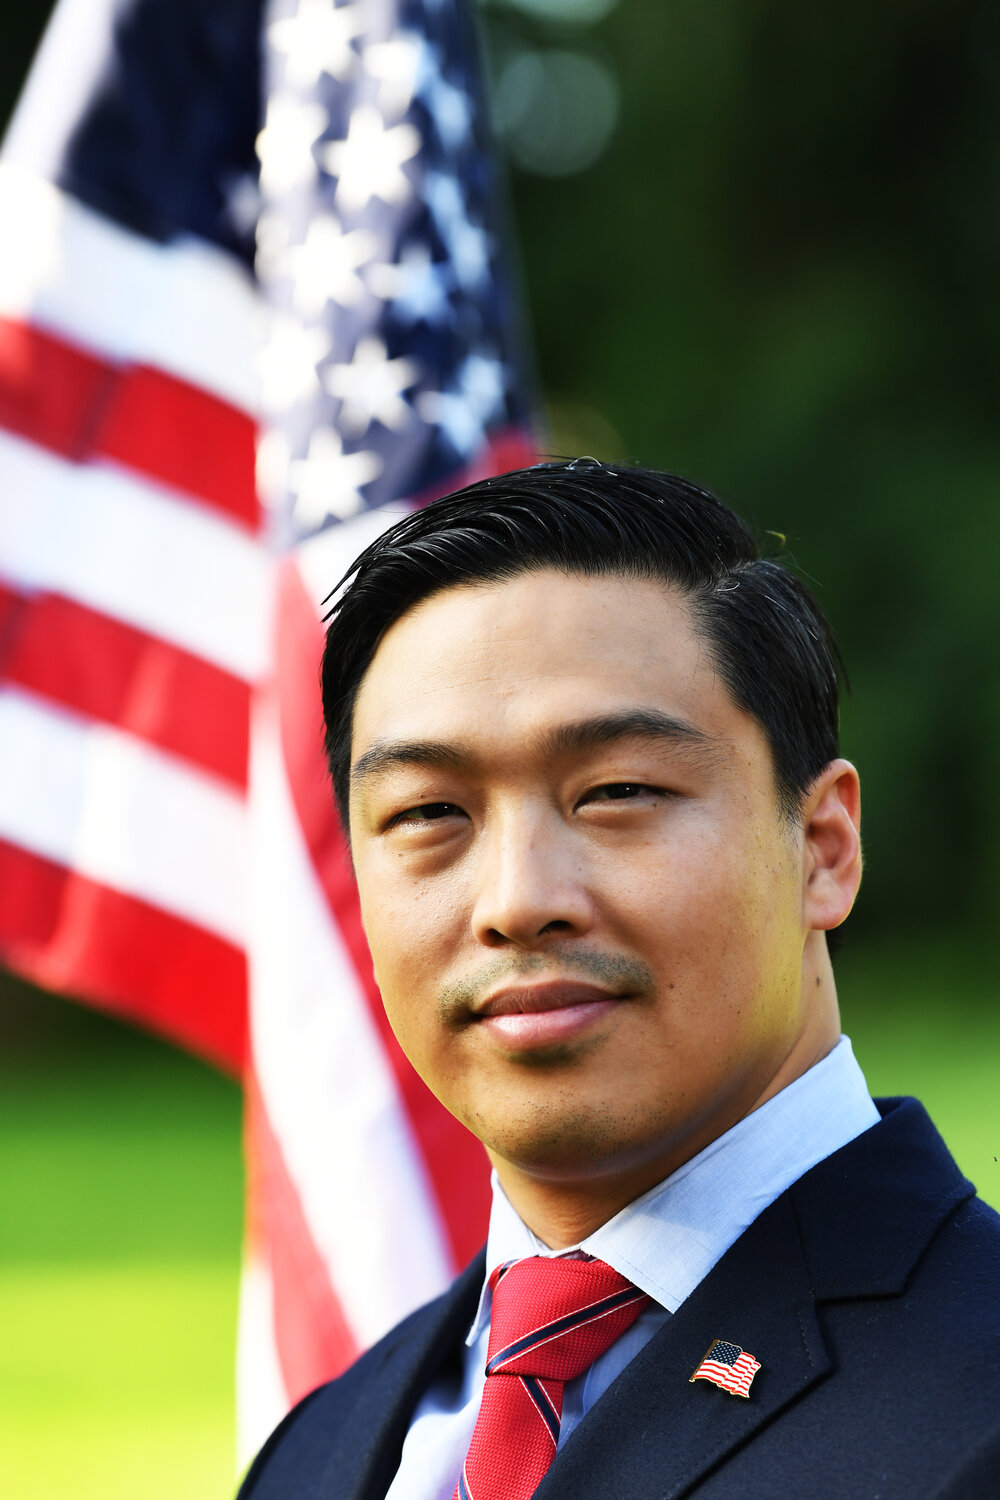 Austin Cheng previously served in the United States Army's JAG Corps, effectively the Army's legal branch.